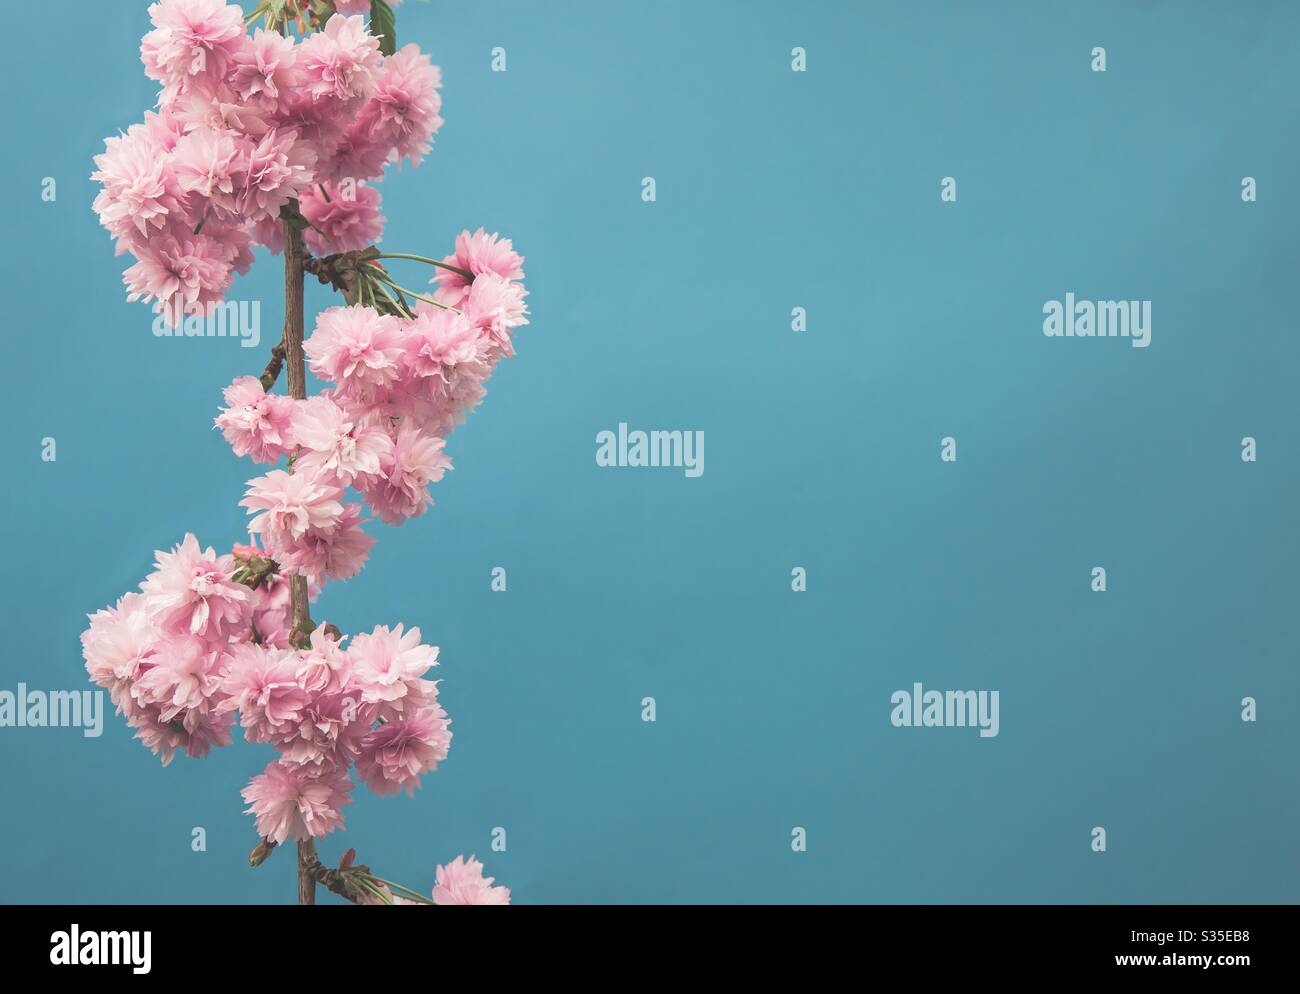 Pink cherry blossom tree on blue background with copy space Stock Photo